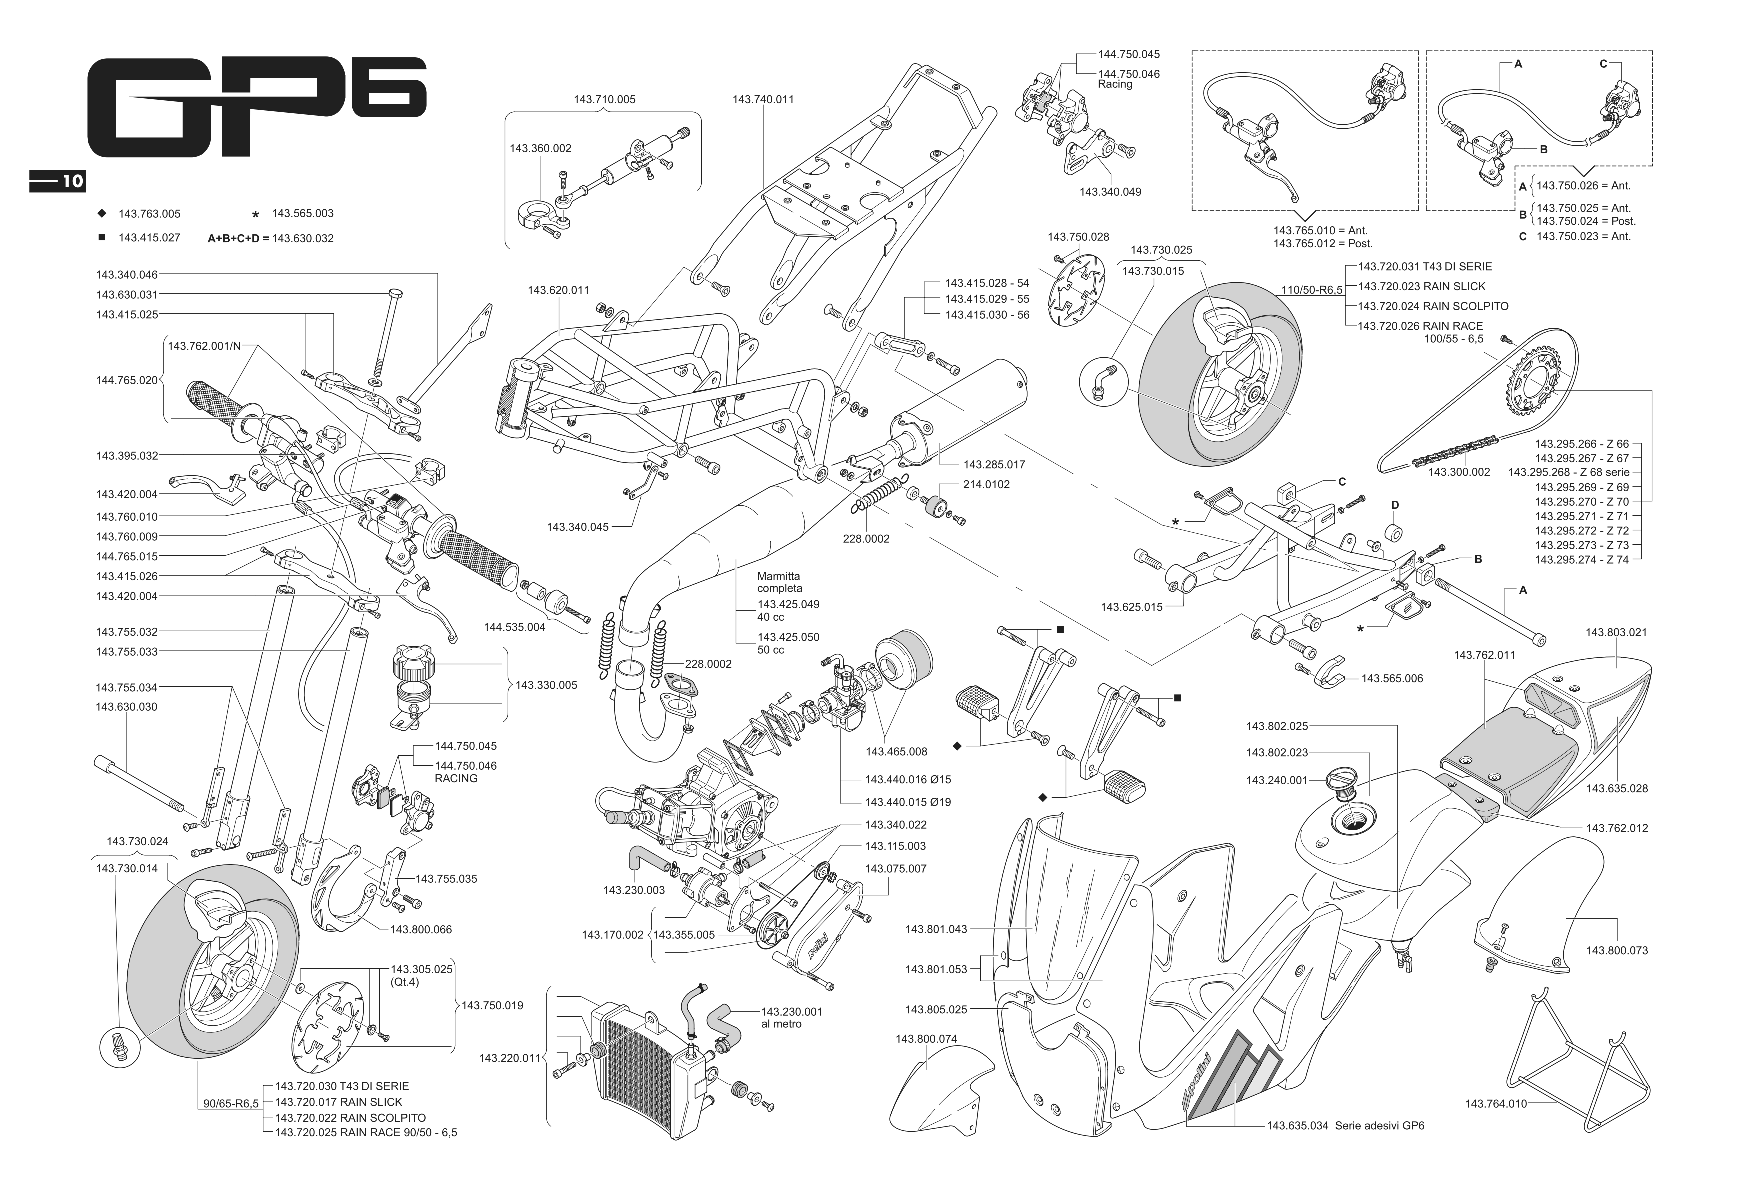 Exploded view Chassis - Motoronderdelen